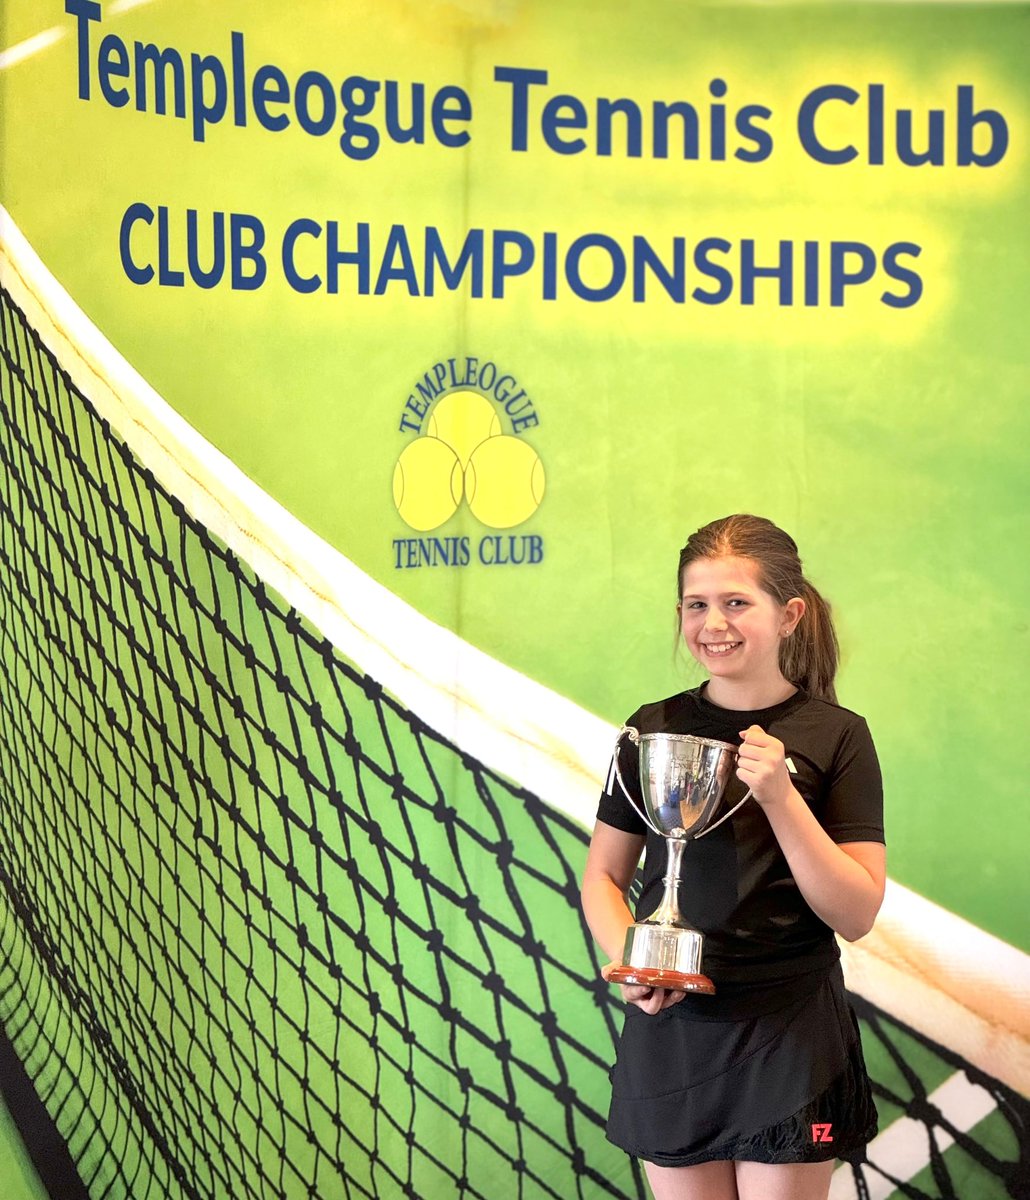 Congratulations to Aryia Pringle who won the National Junior Open Tour 1000 at Templeogue Tennis Club and is now ranked U12 #1 in Ireland. 👏👏🎾